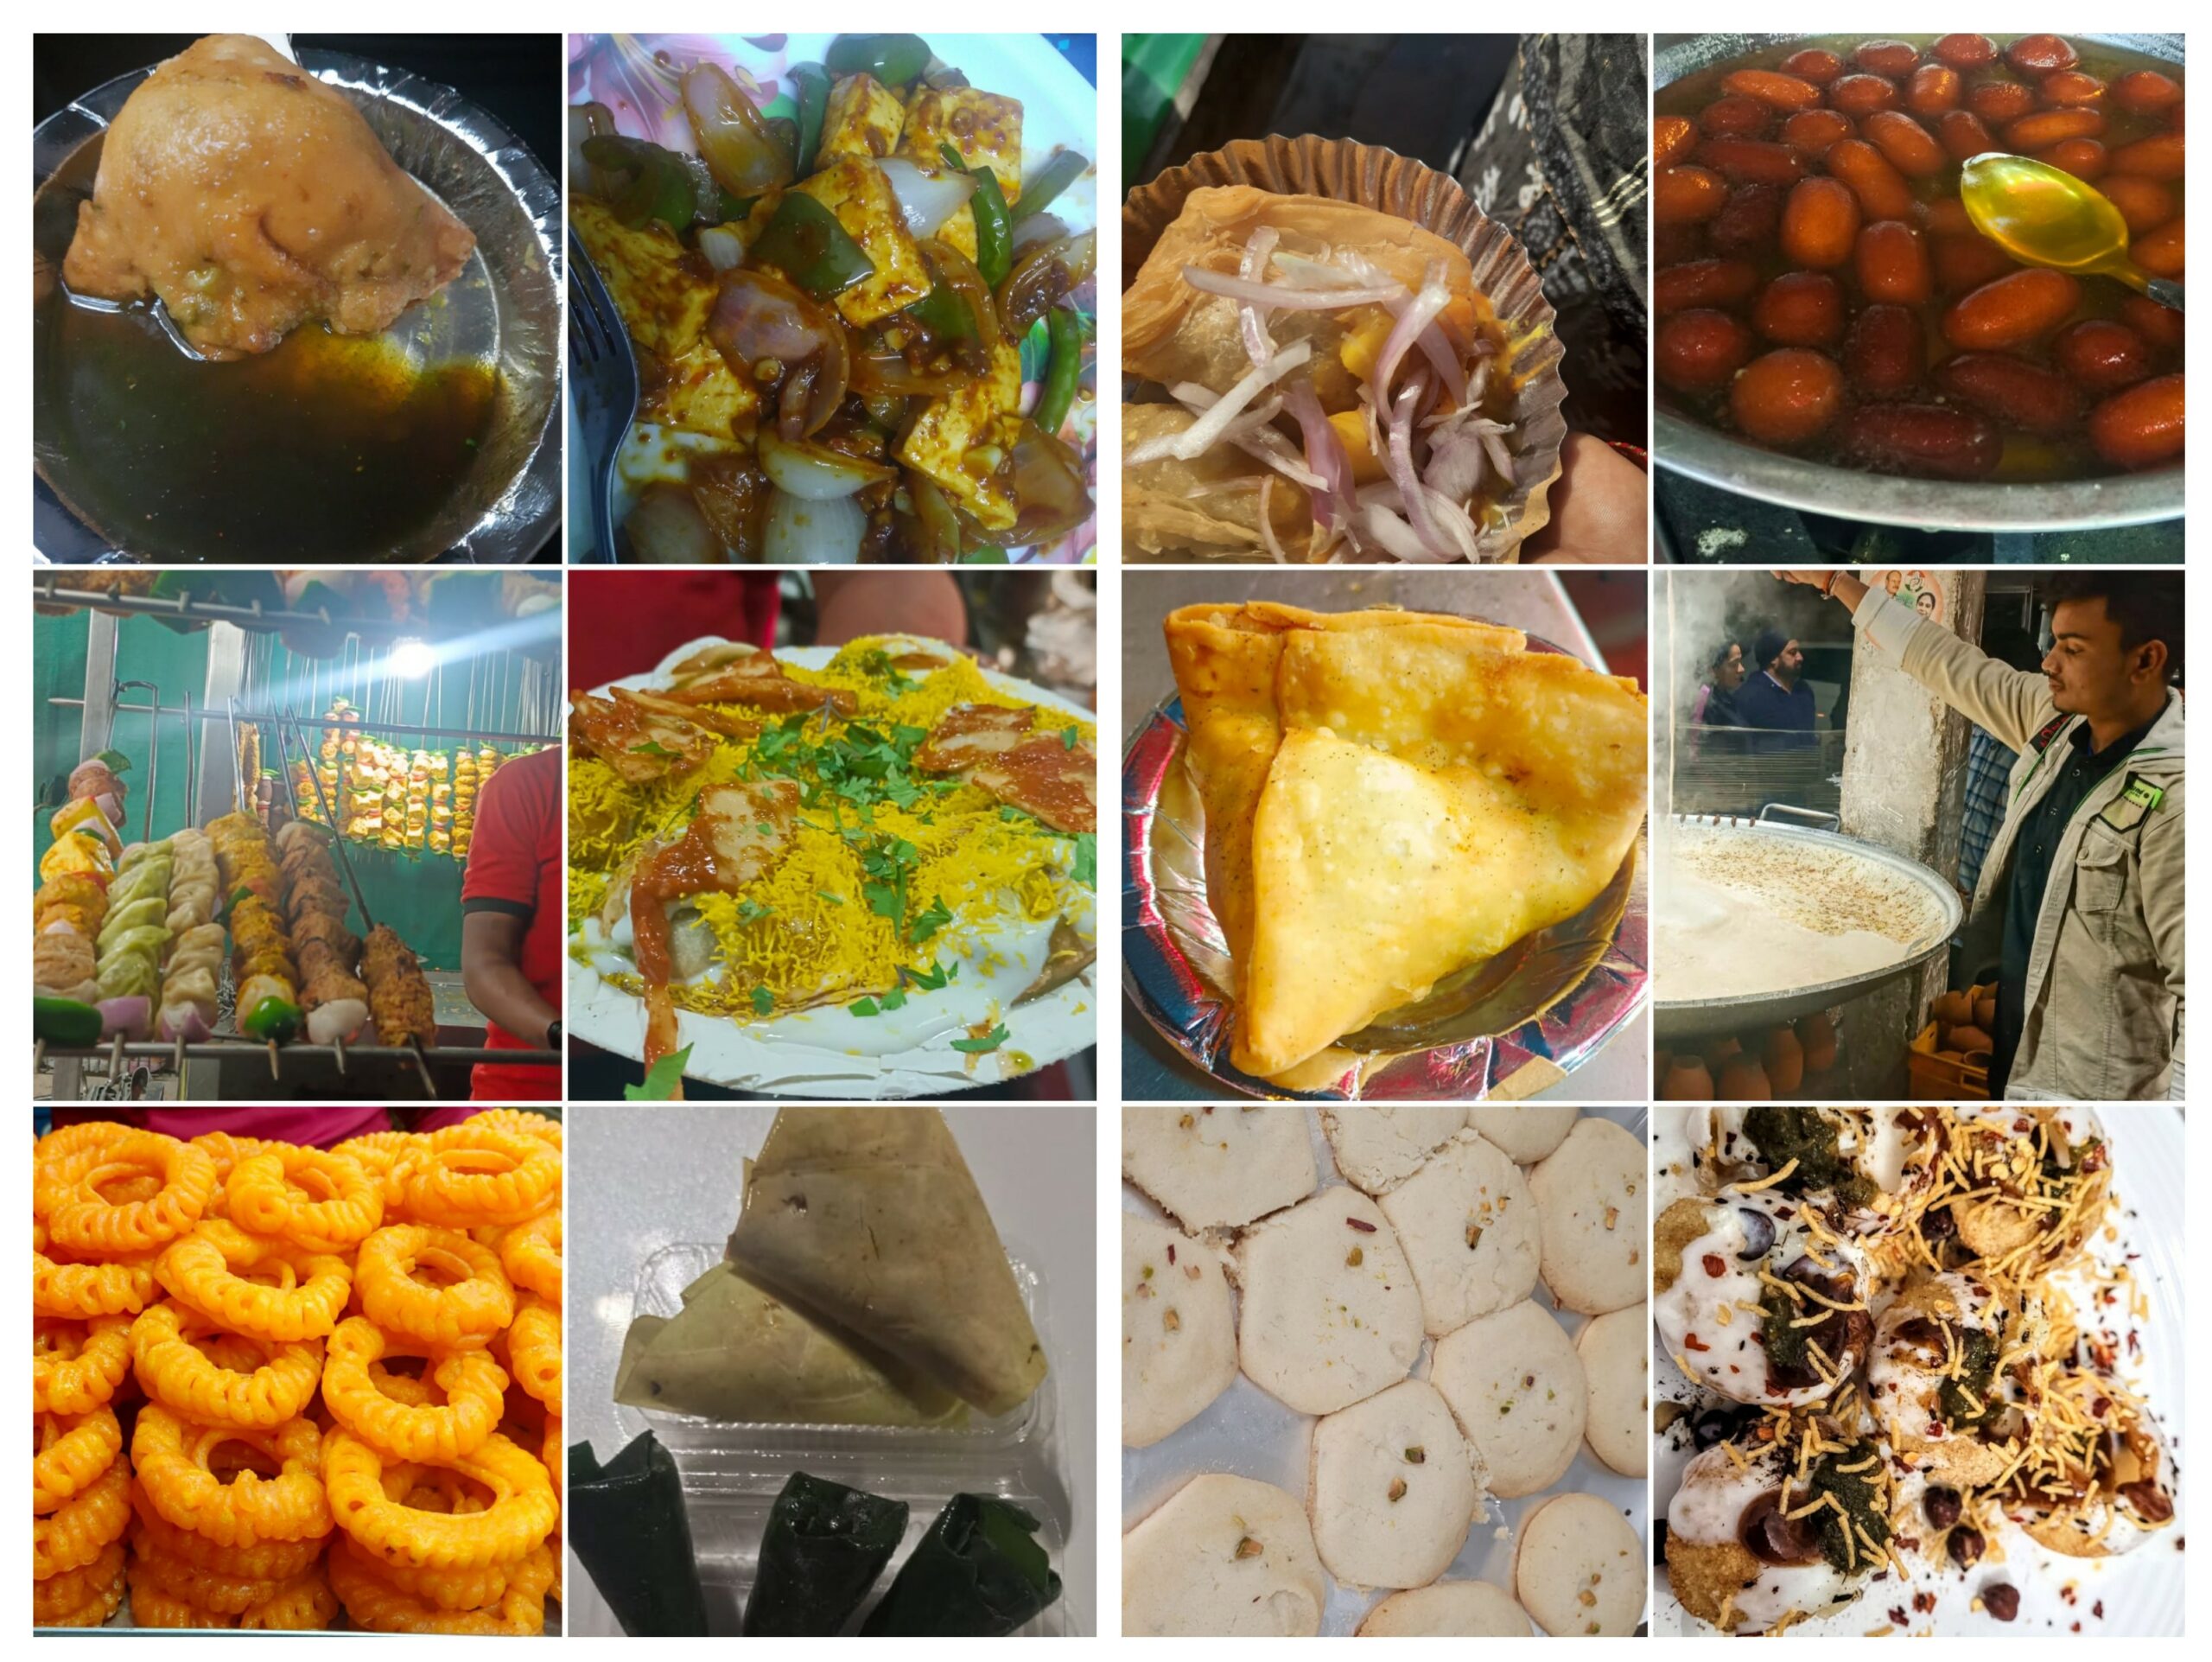 Some of my favorite street food items in New Delhi